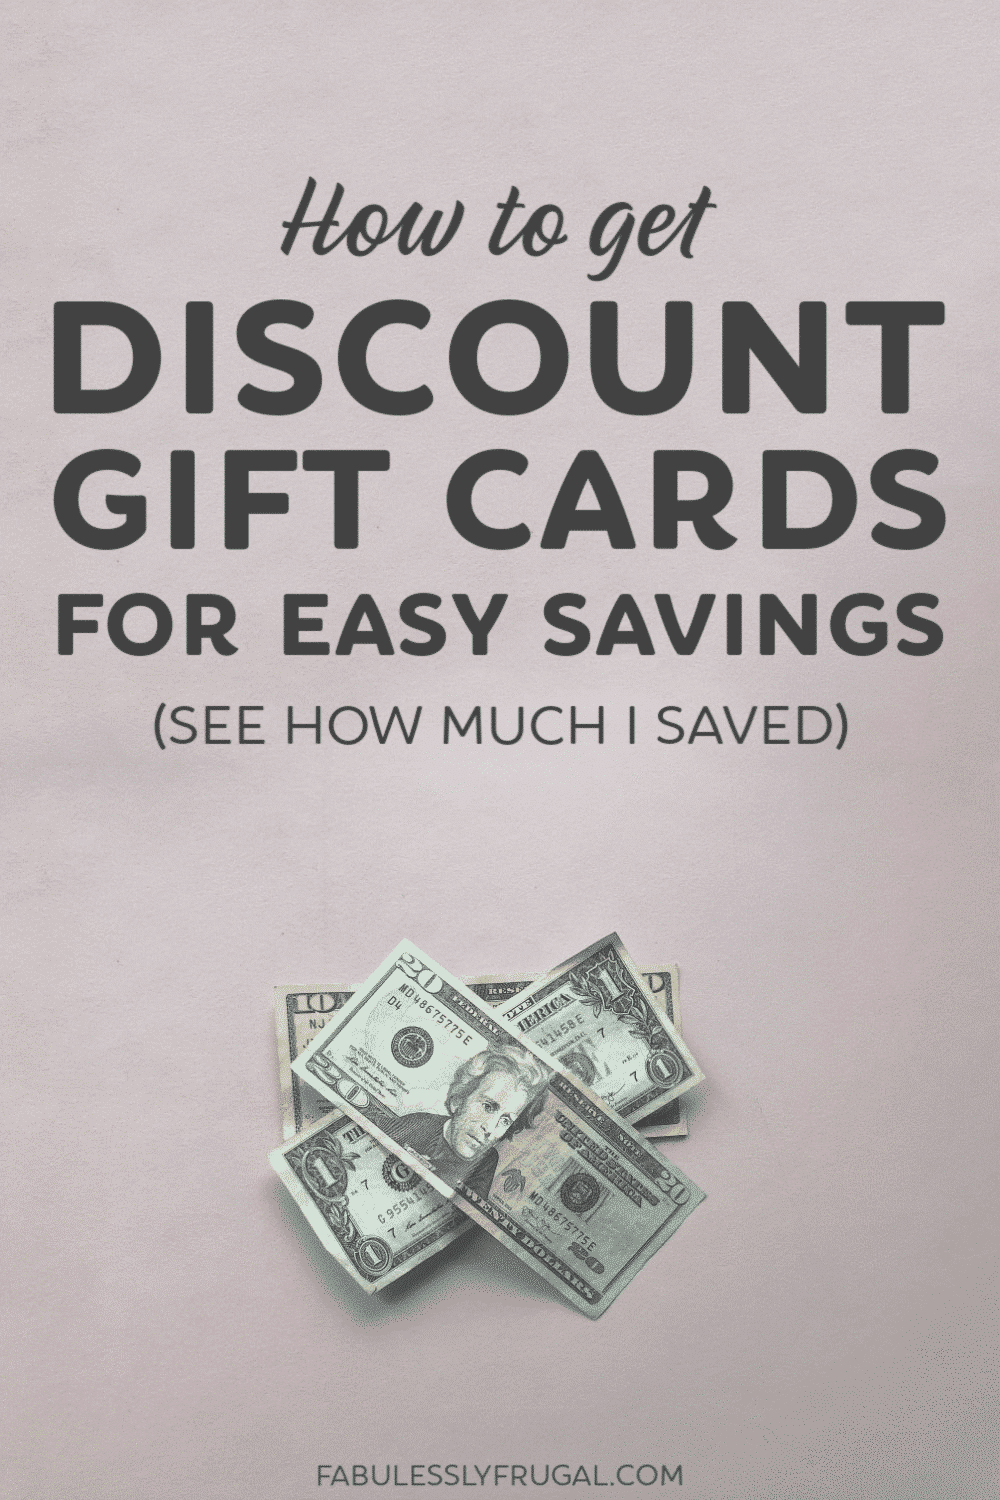 How to get discount gift cards